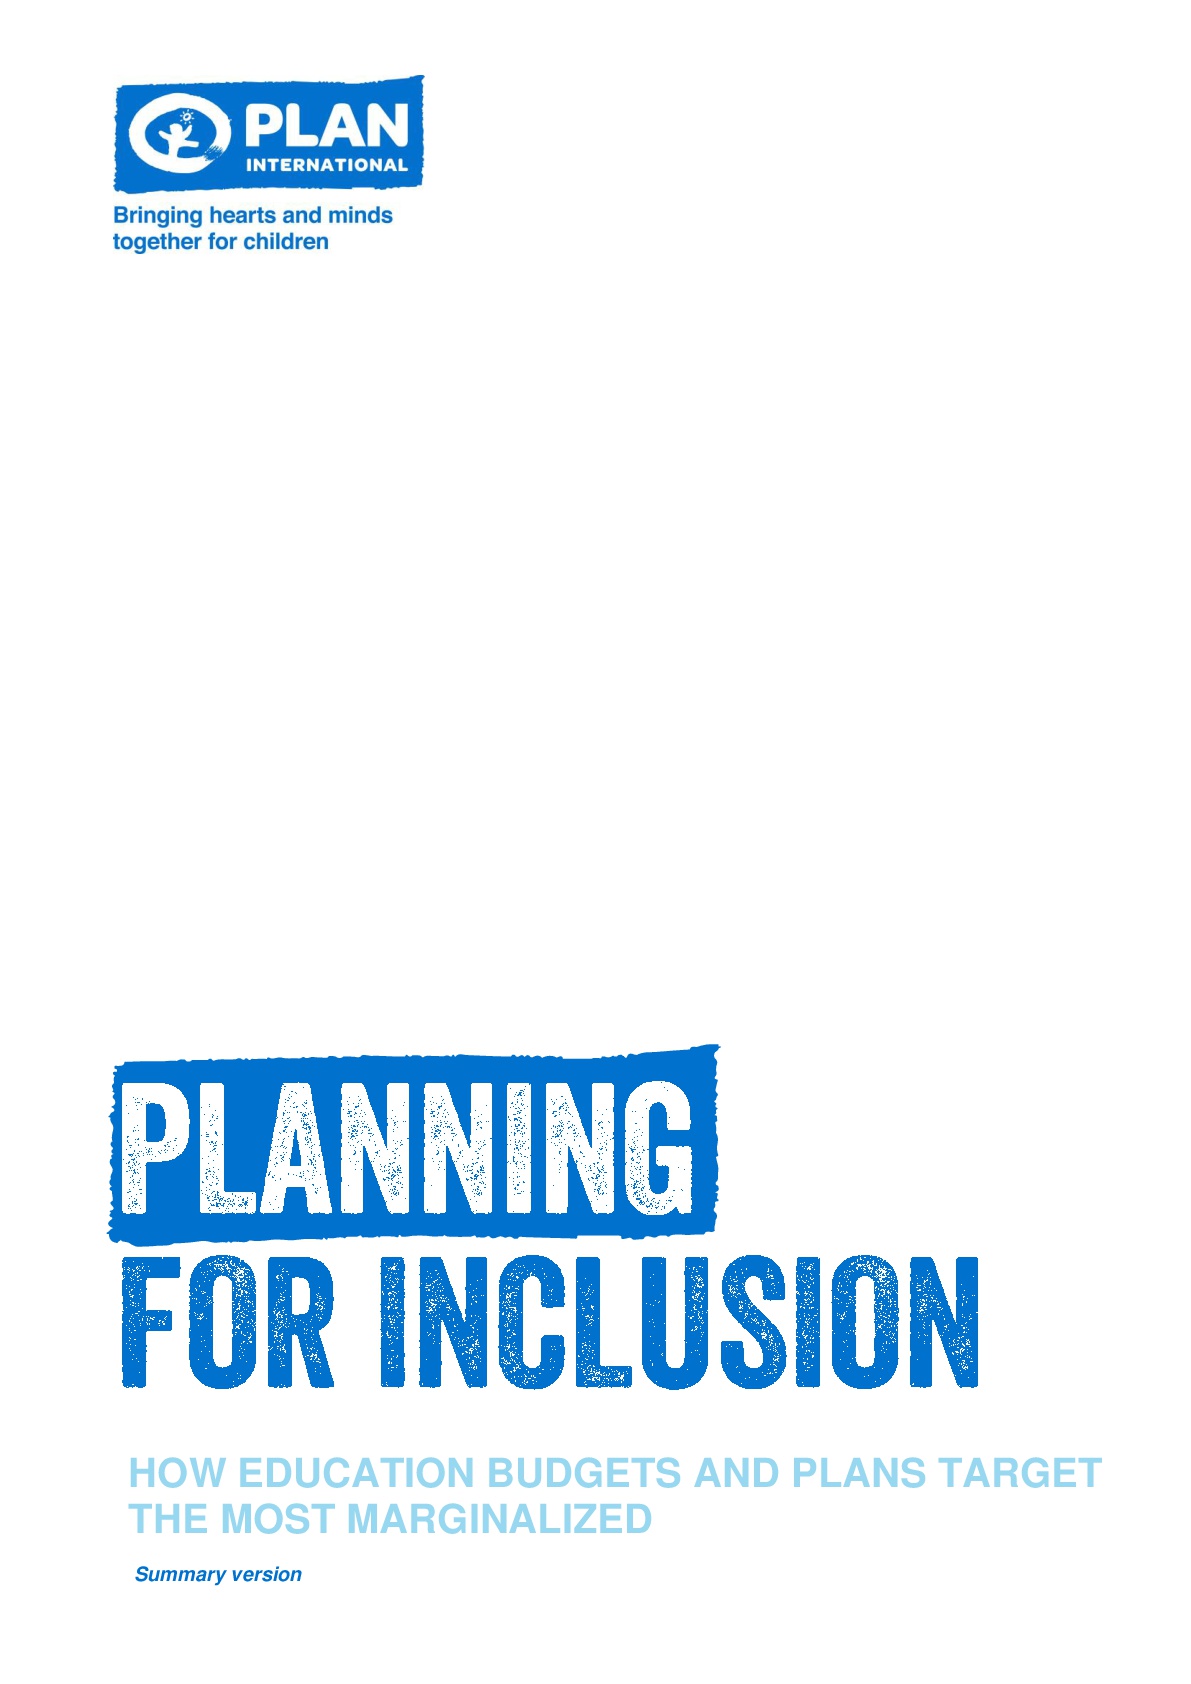 Planning for inclusion: How education budgets and plans target the most marginalized